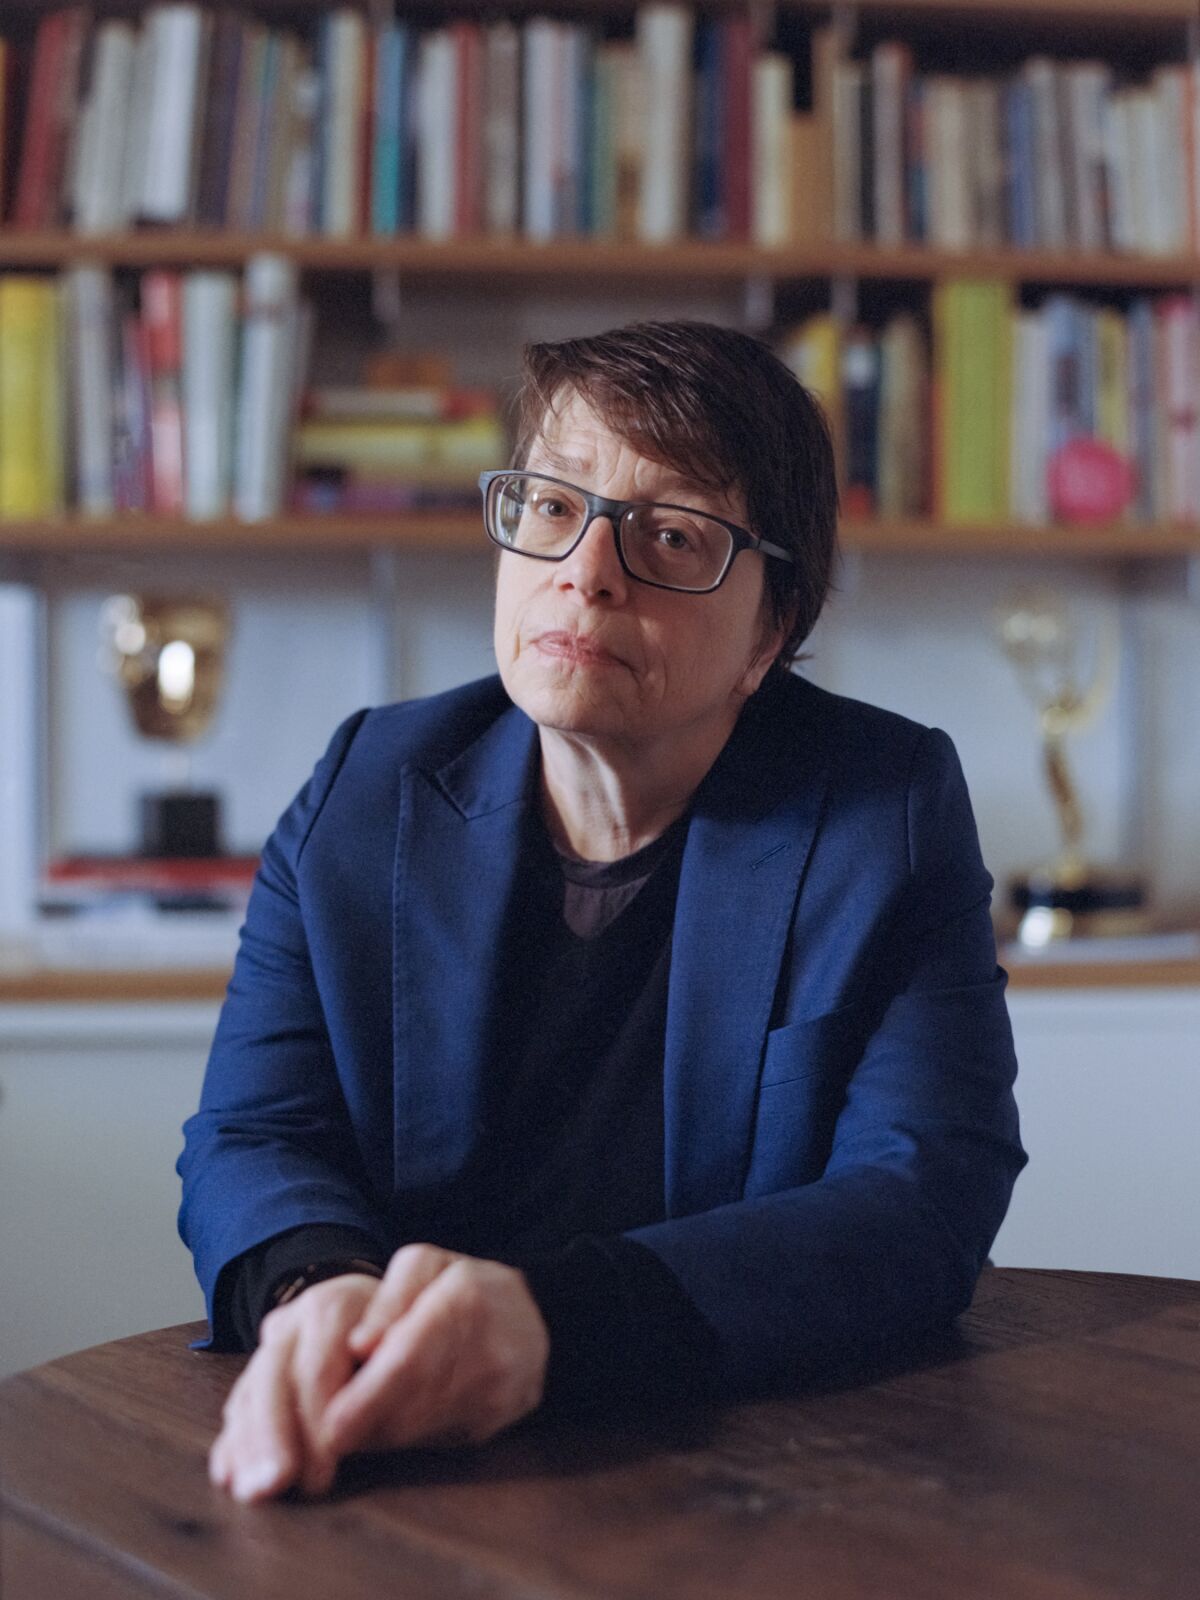 A woman with short hair and glasses, seated at a table.